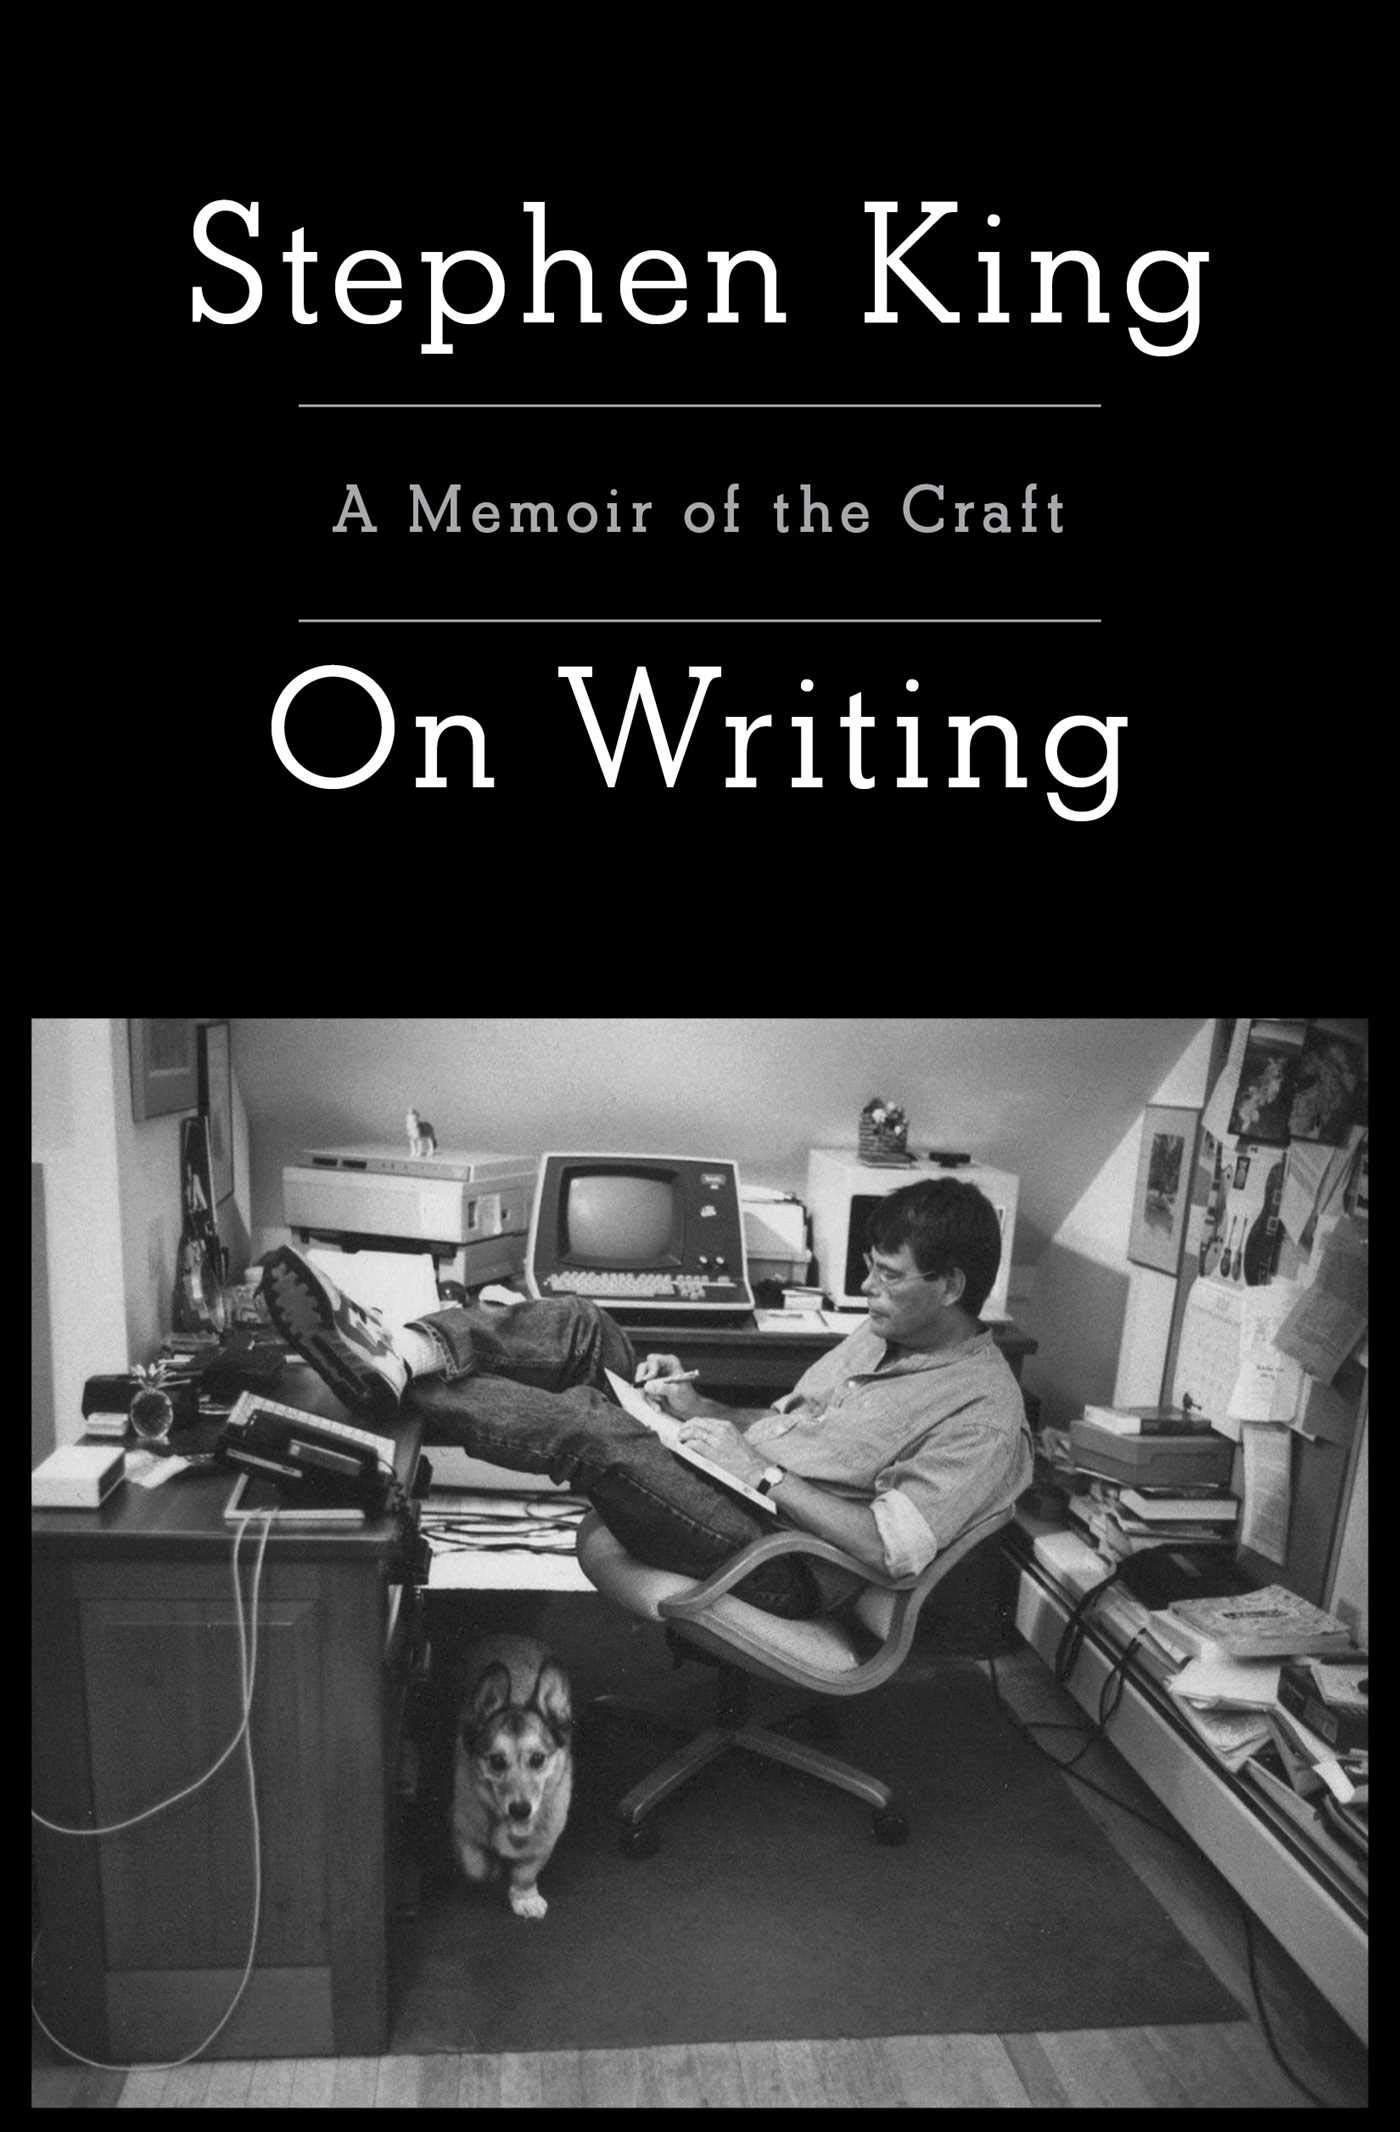 On Writing: A Memoir of the Craft by Stephen King book cover